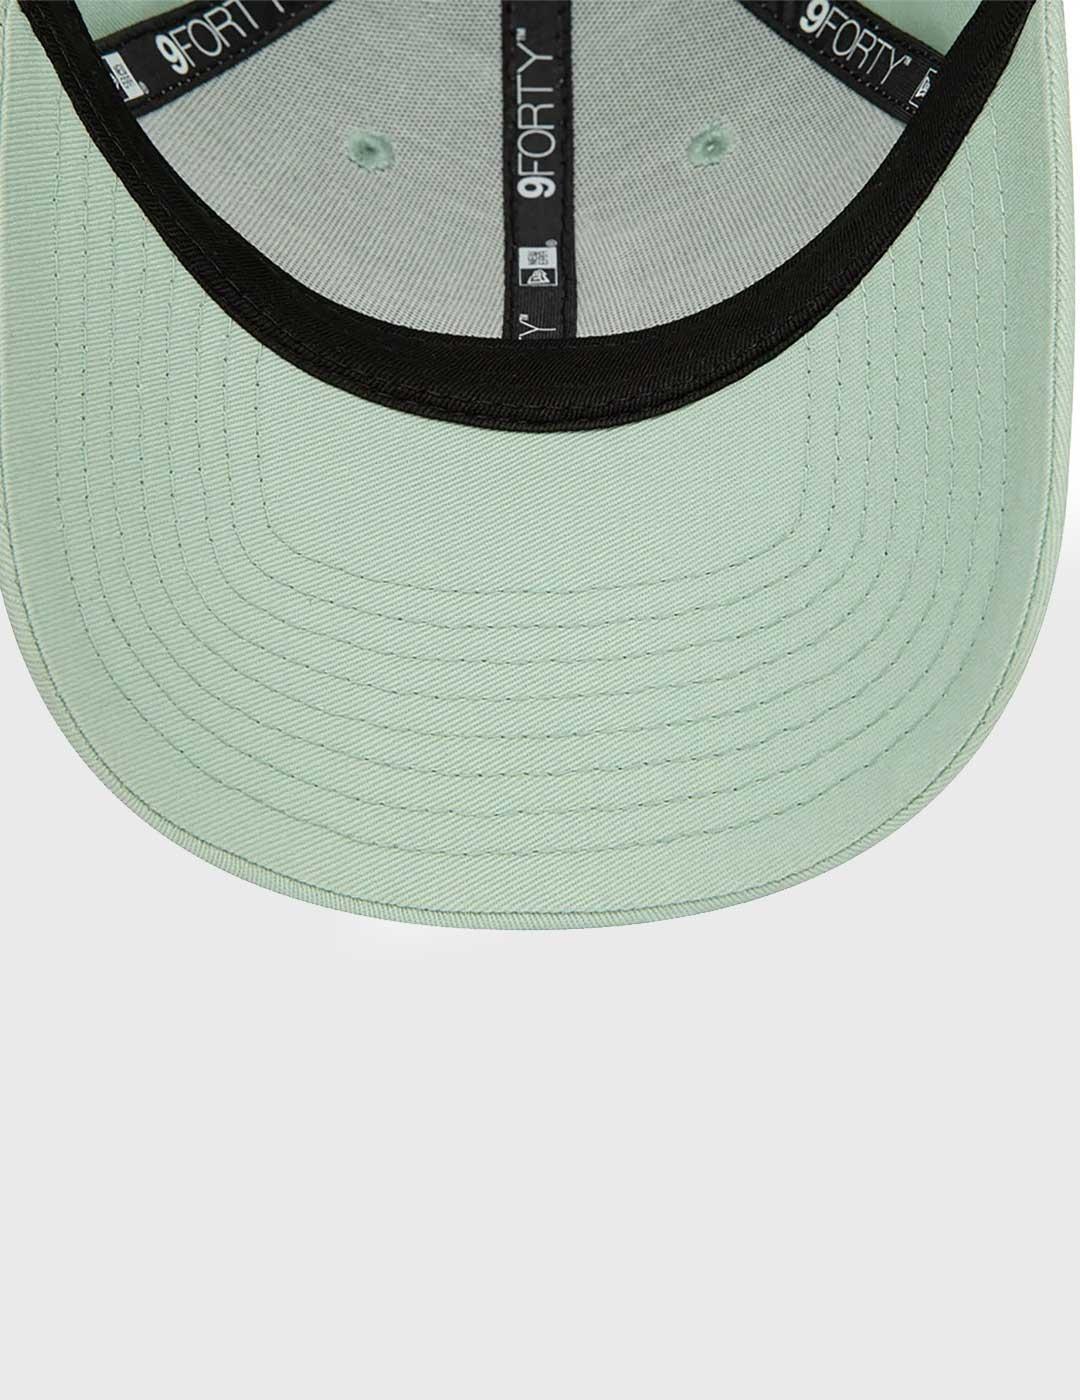 New Era Womans League 9Forty Gorra verde para mujer